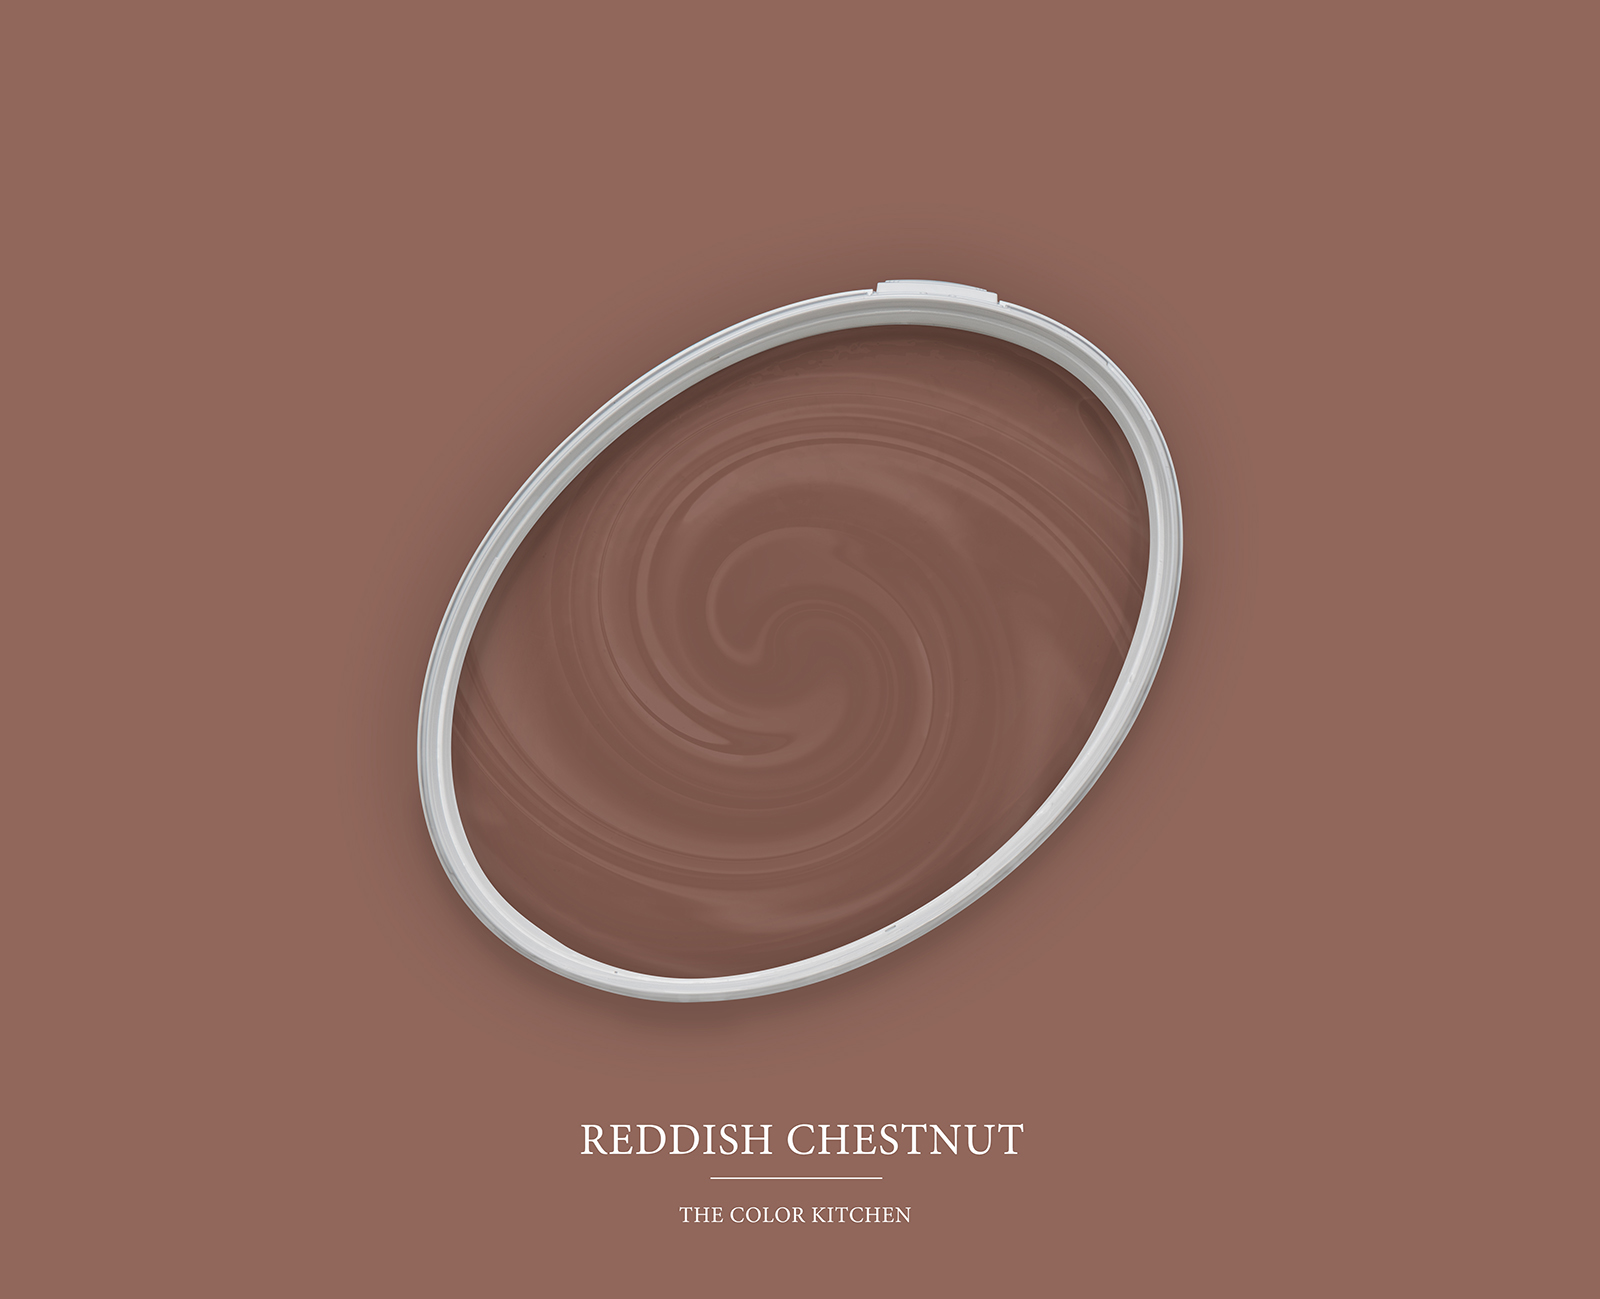         Wall Paint TCK5014 »Reddish Chestnut« in magnificent red-brown – 2.5 litre
    